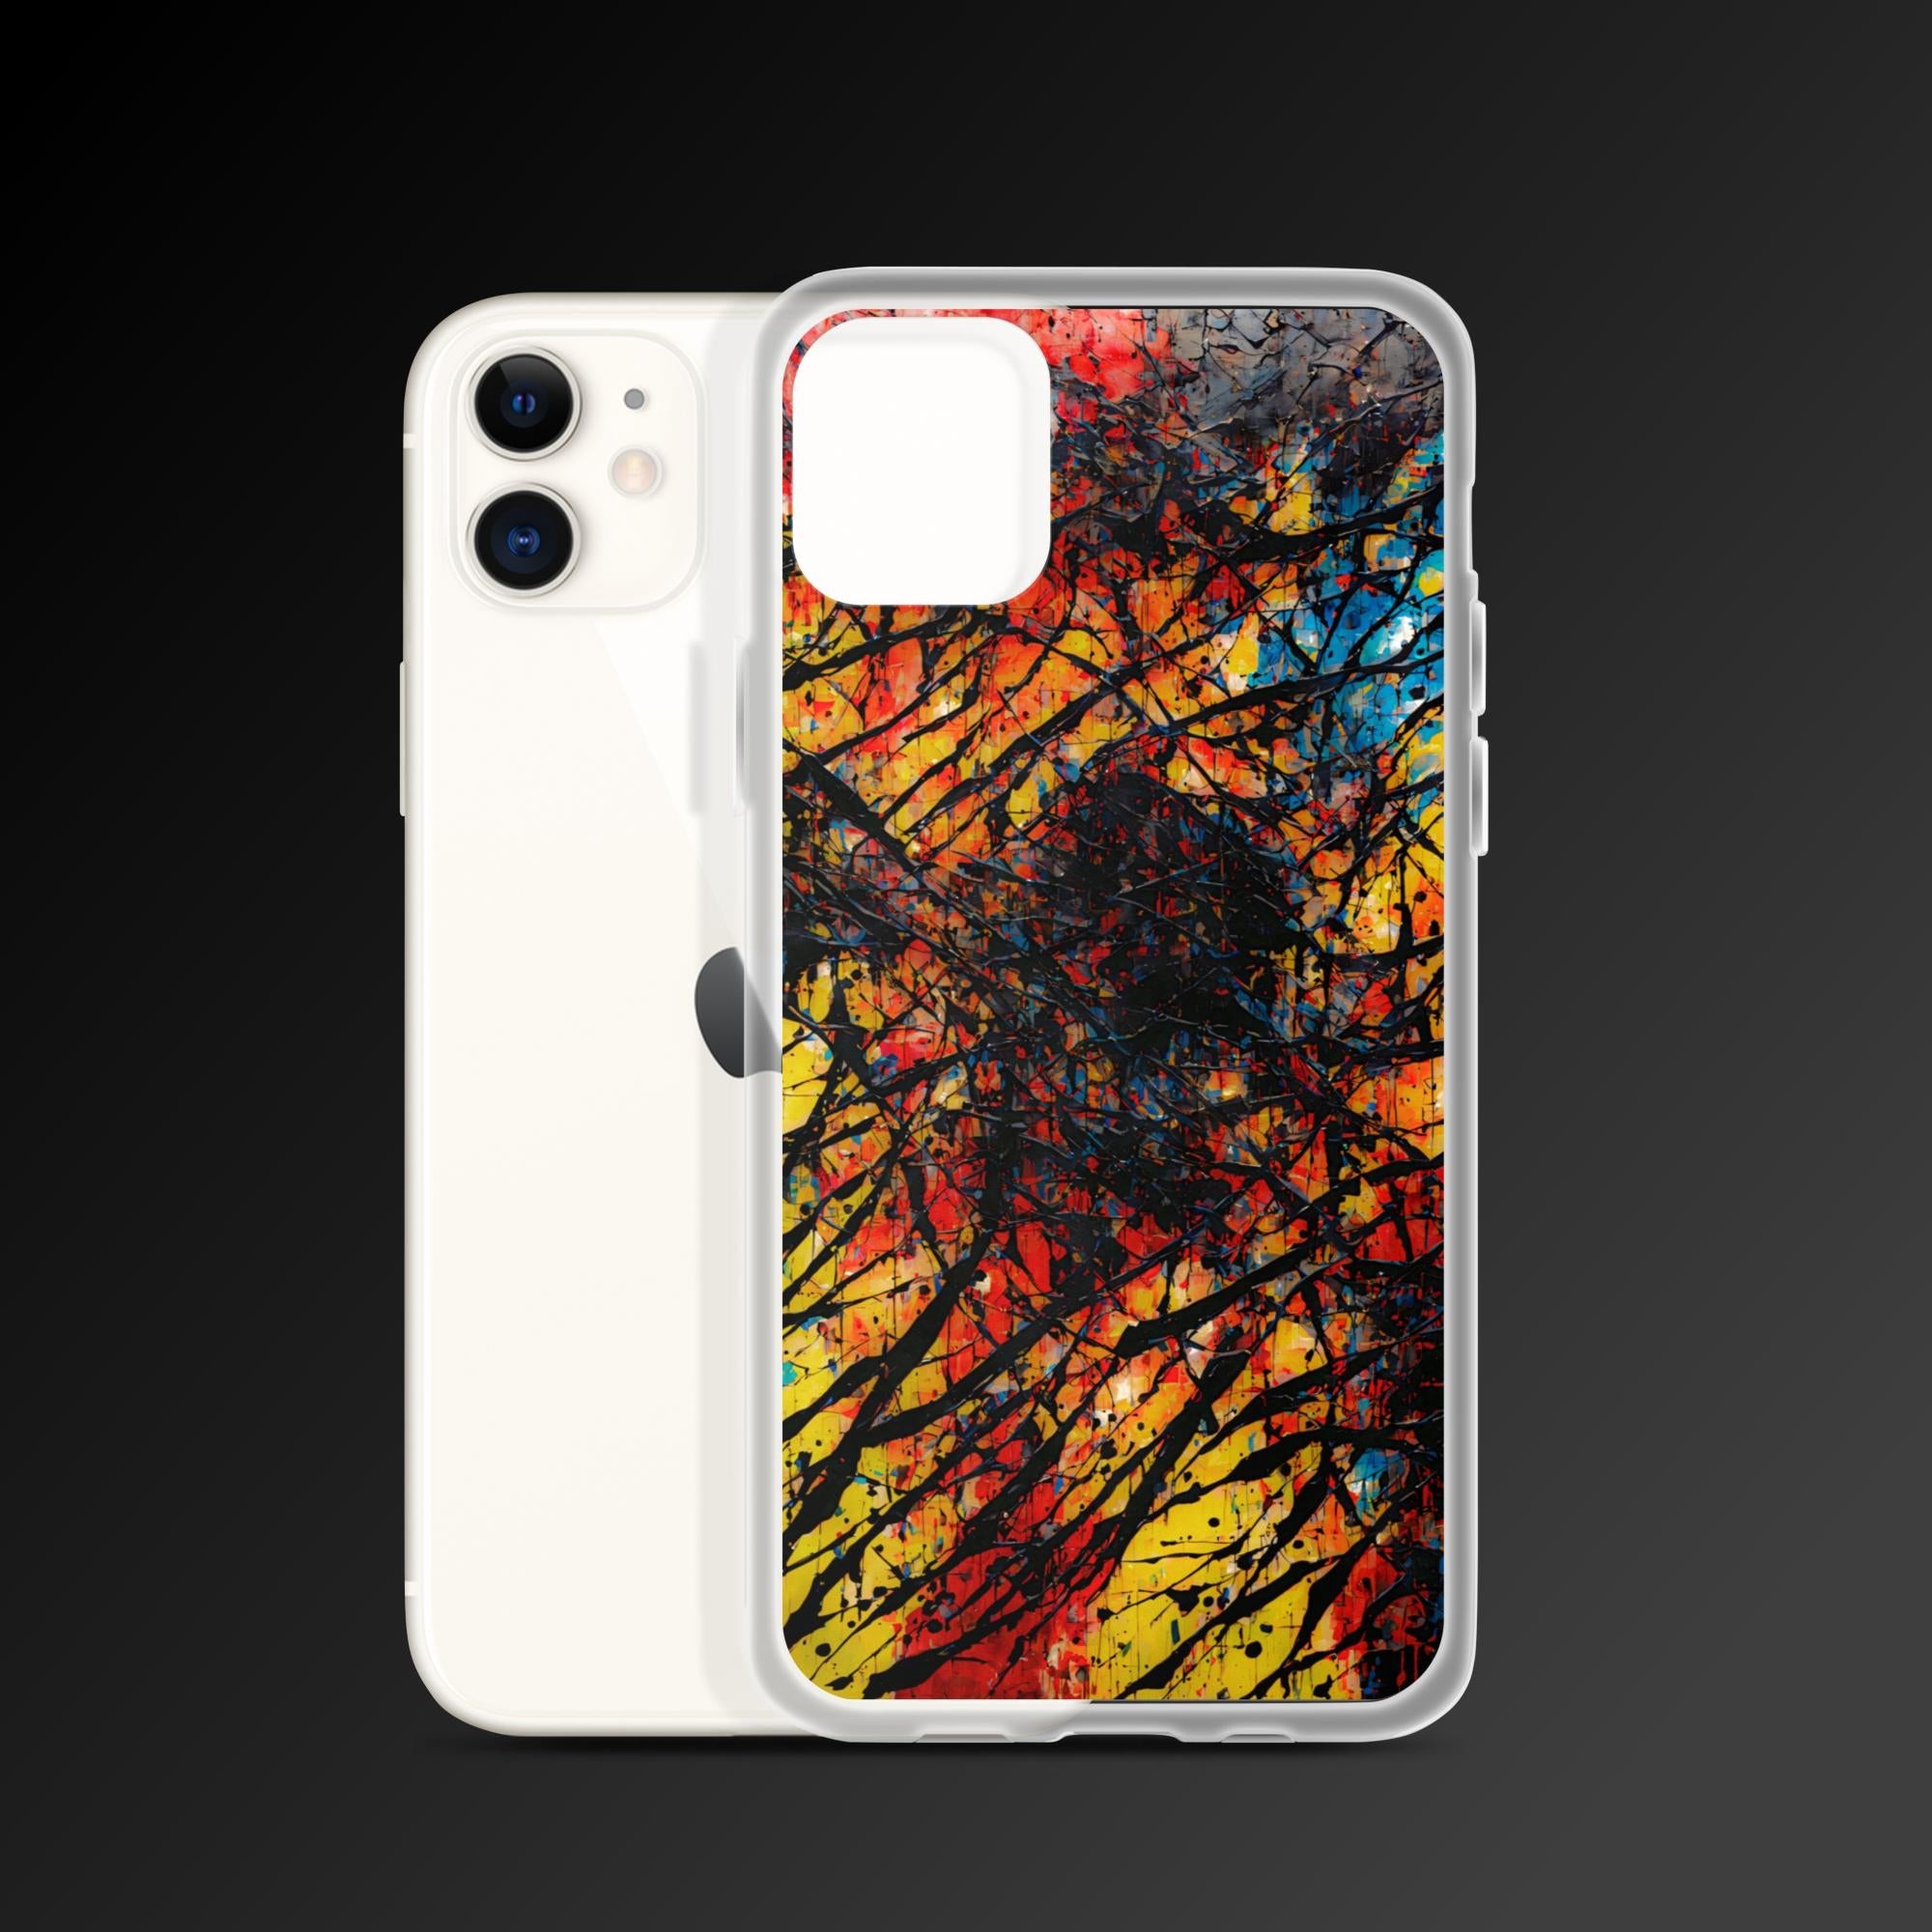 "Deep havoc" clear iphone case - Clear iphone case - Ever colorful